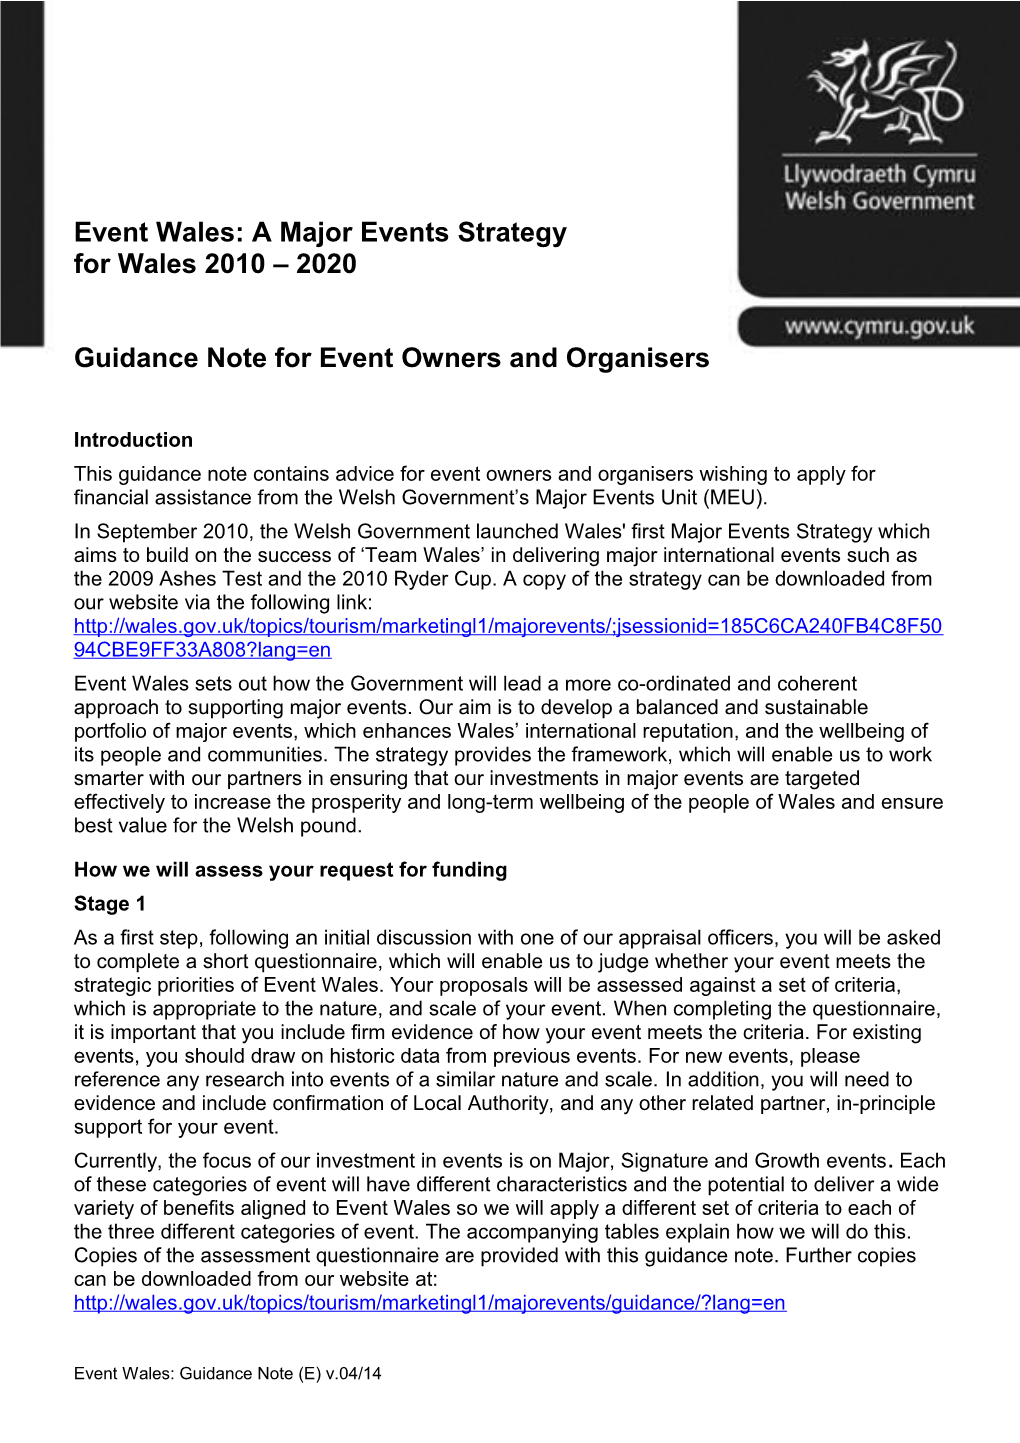 Event Wales: a Major Events Strategy for Wales 2010 2020